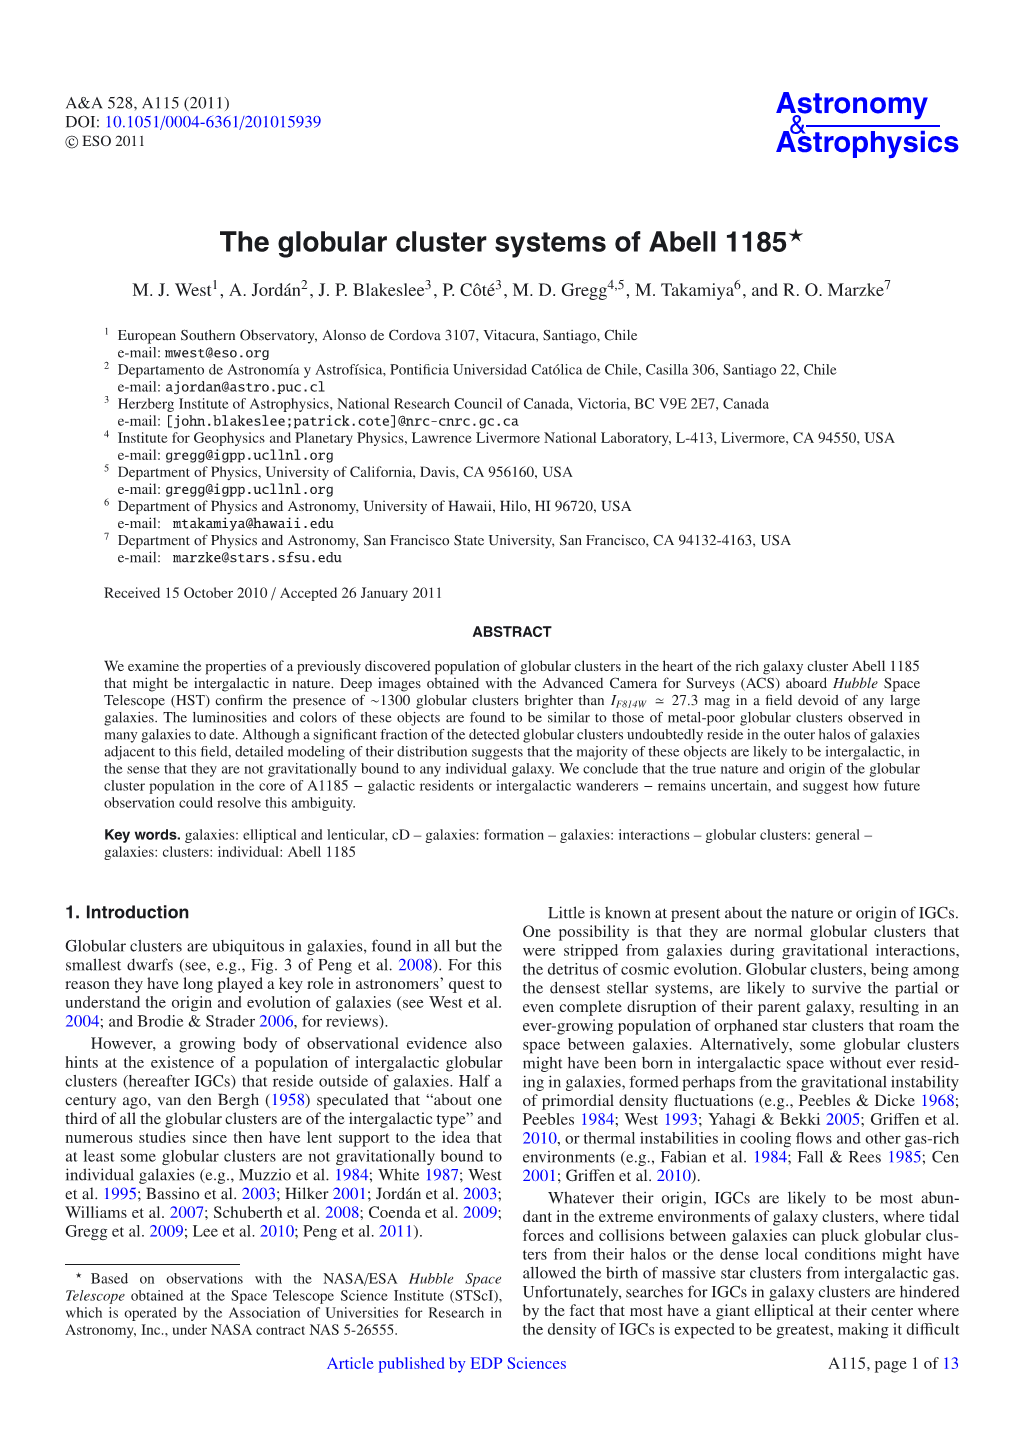 The Globular Cluster Systems of Abell 1185⋆